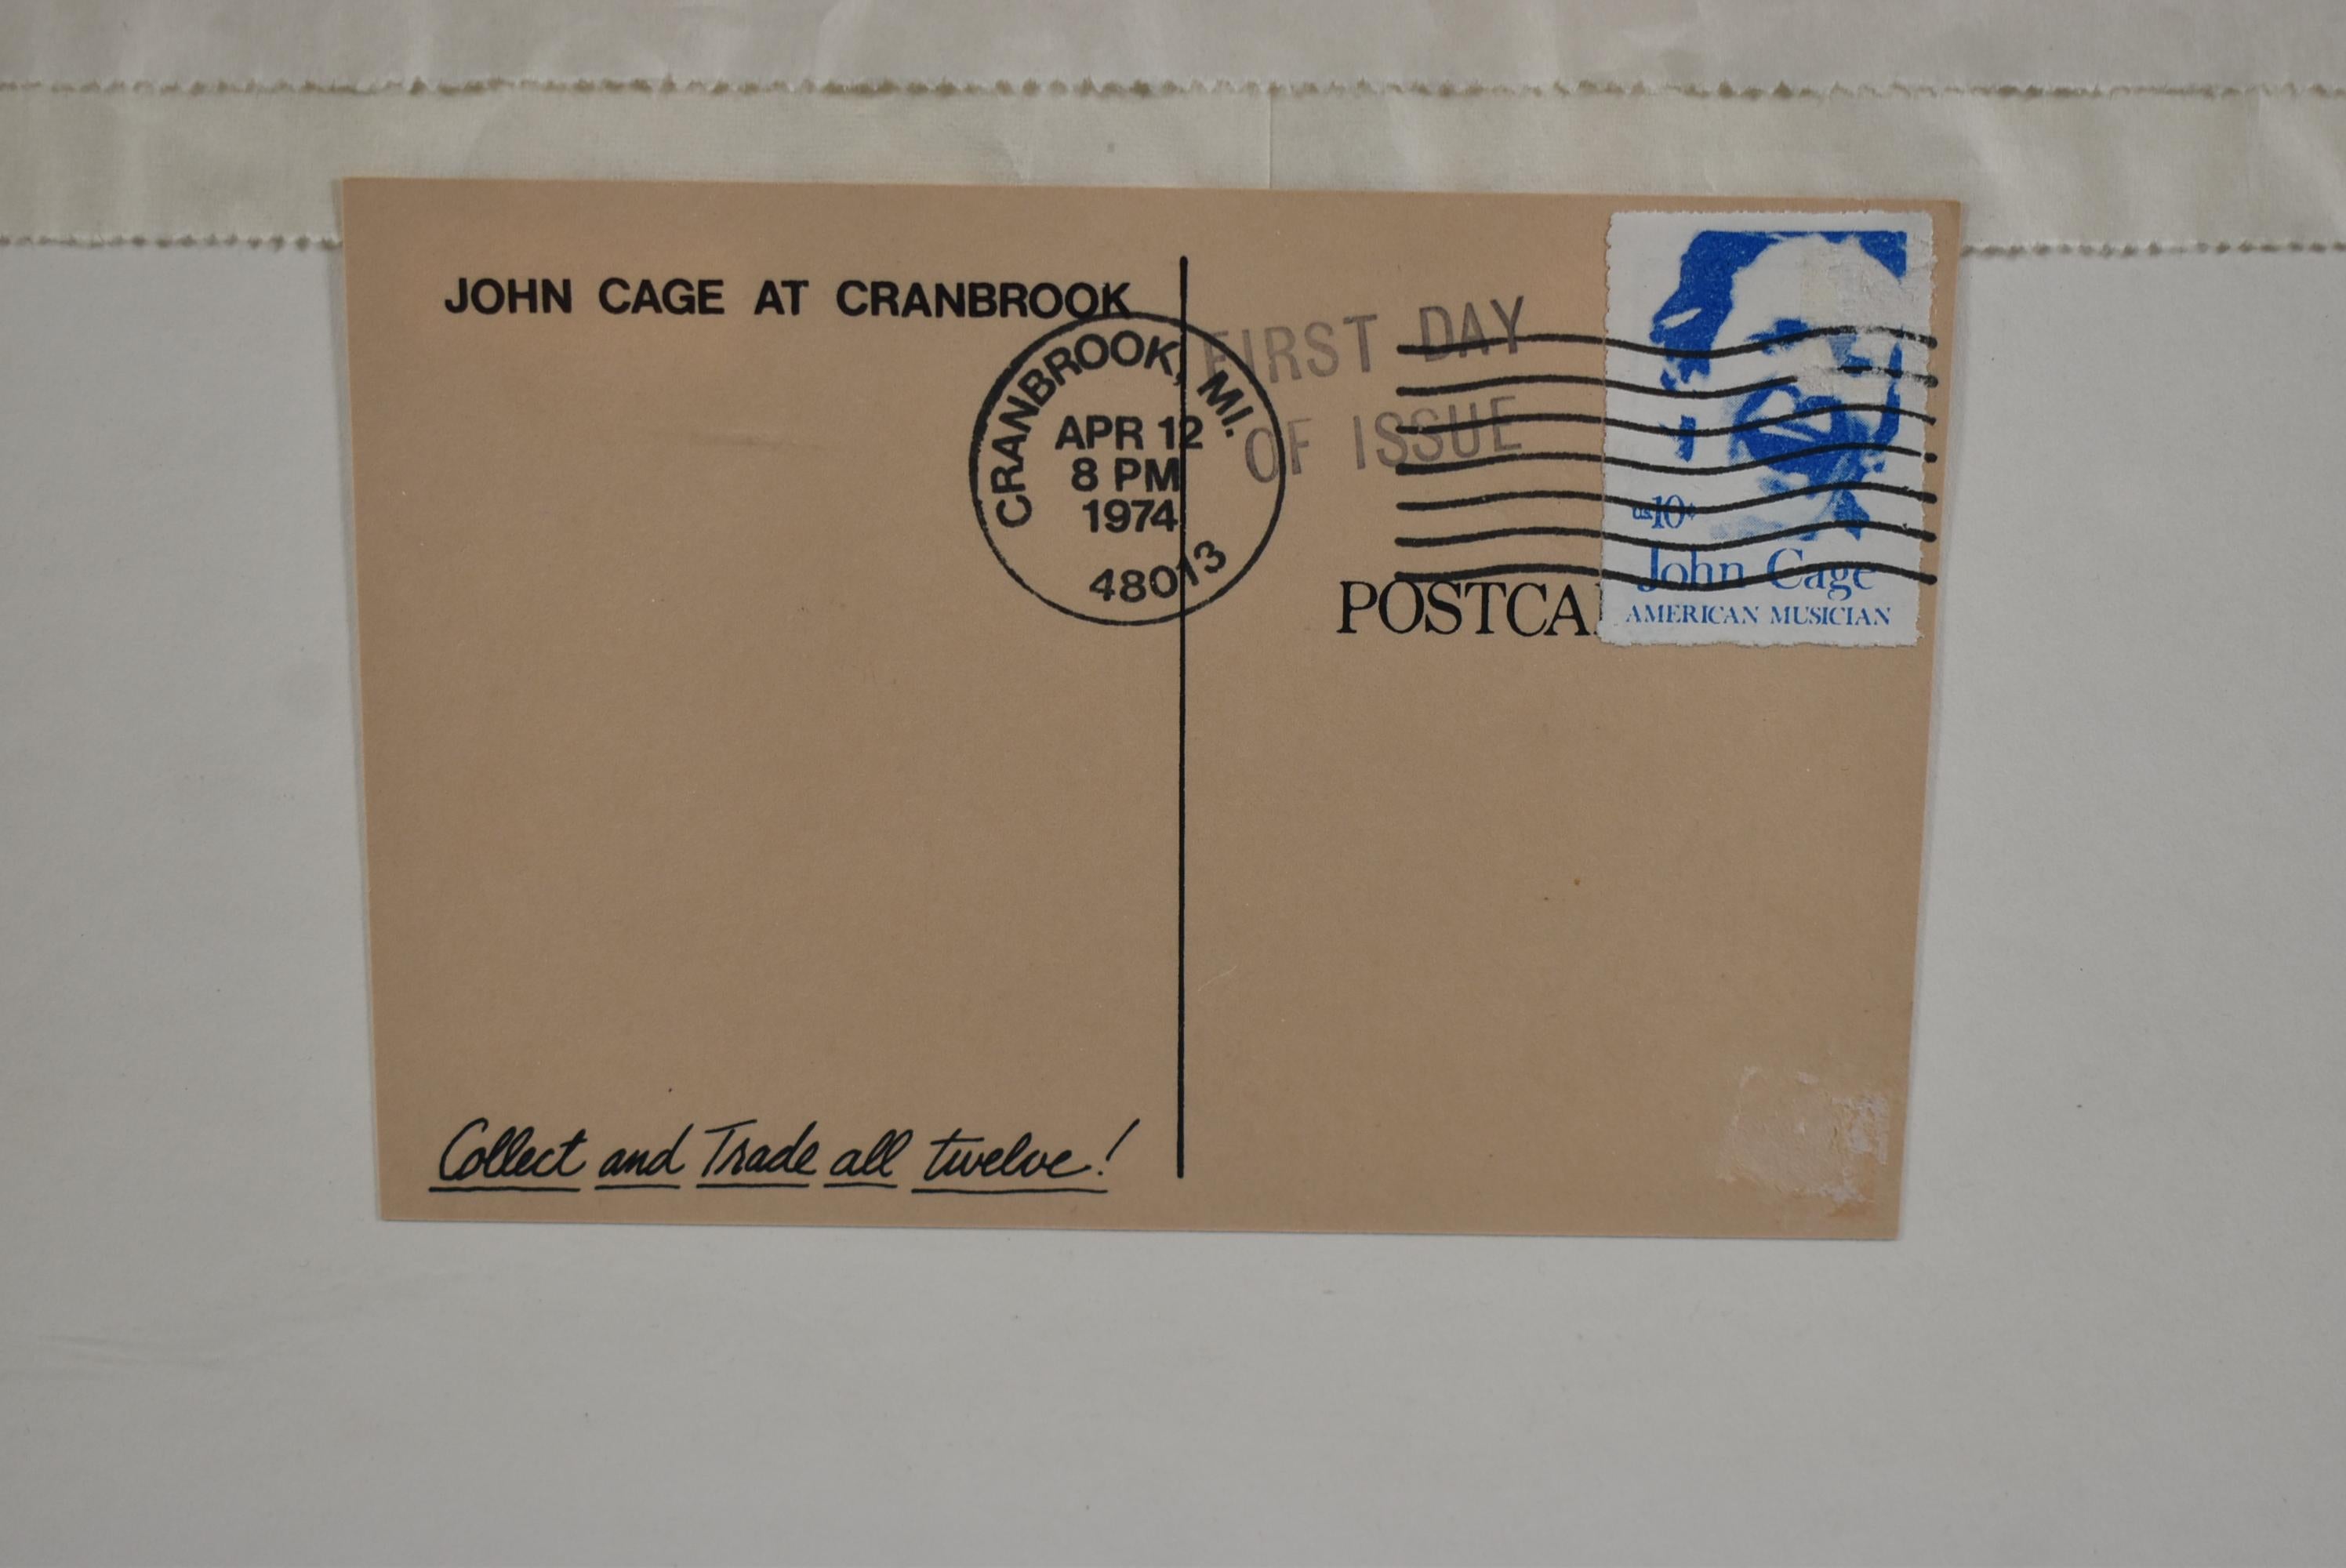 Mixed media by John Cage (1912-1992). Bag with John Cage along with a post card with his image on the stamp from Cranbrook (MI) post marked April12, 1984. Part of an exhibition by Cage at Cranbrook School of The Arts. Created in the print